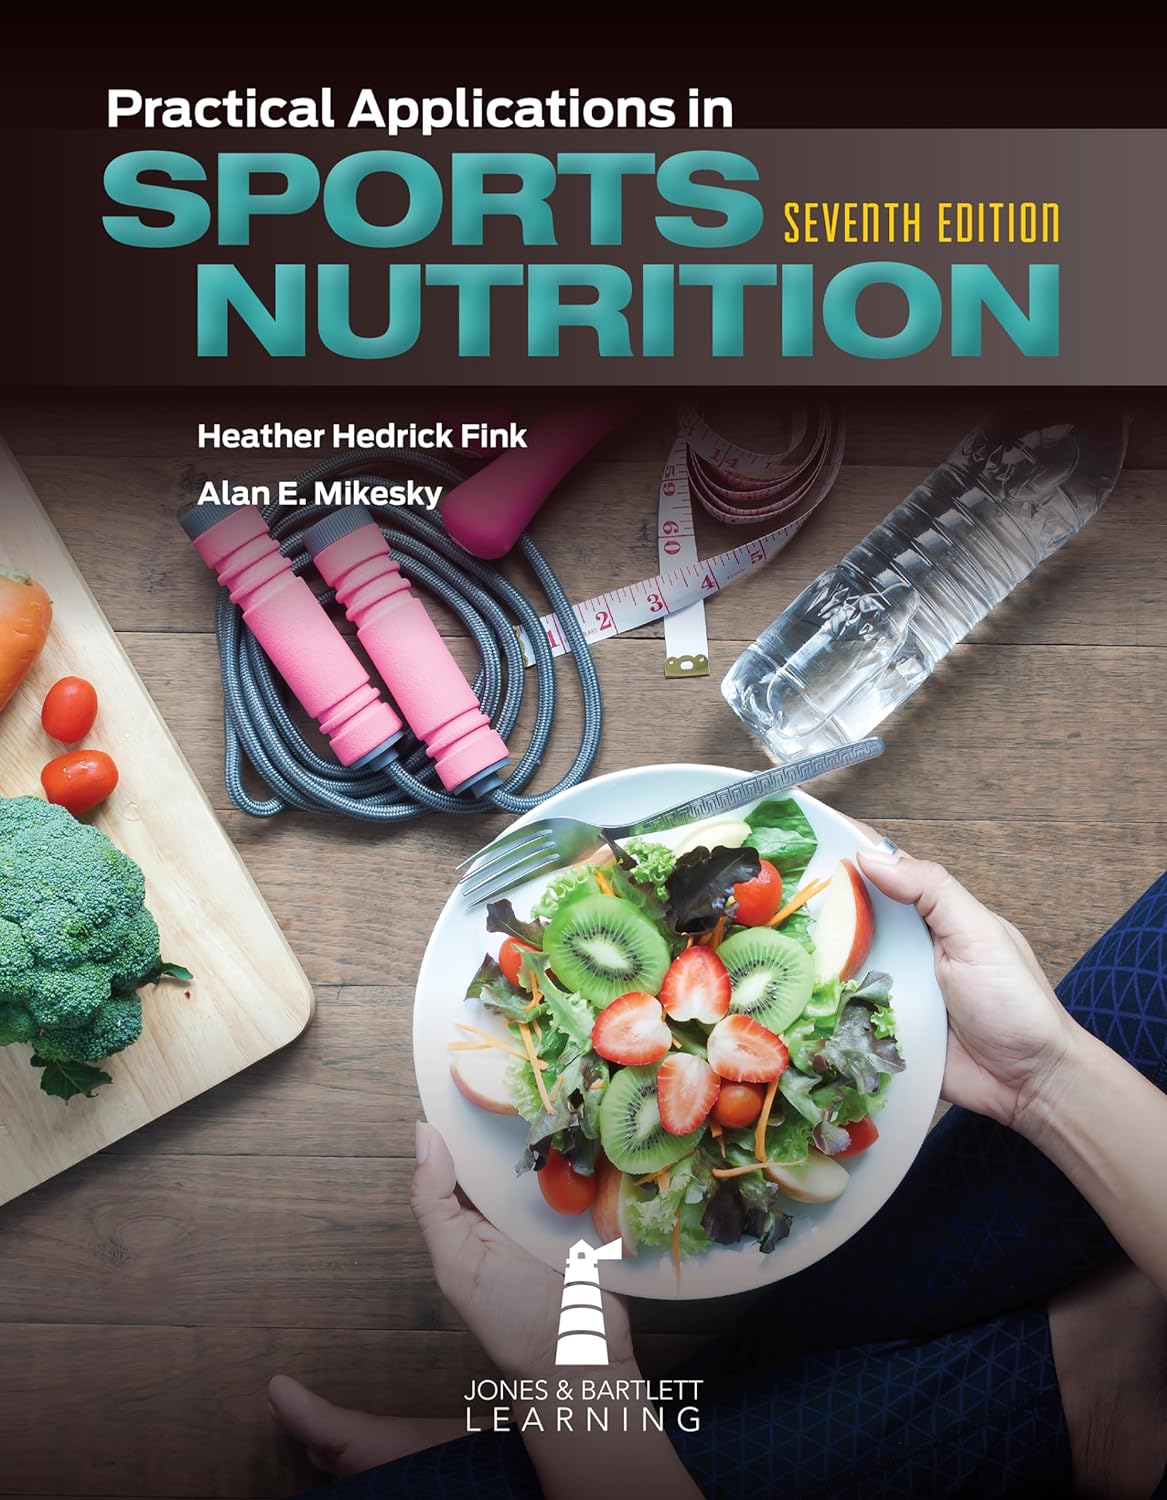 Practical-Applications-in-Sports-Nutrition-7th-Edition.jpg